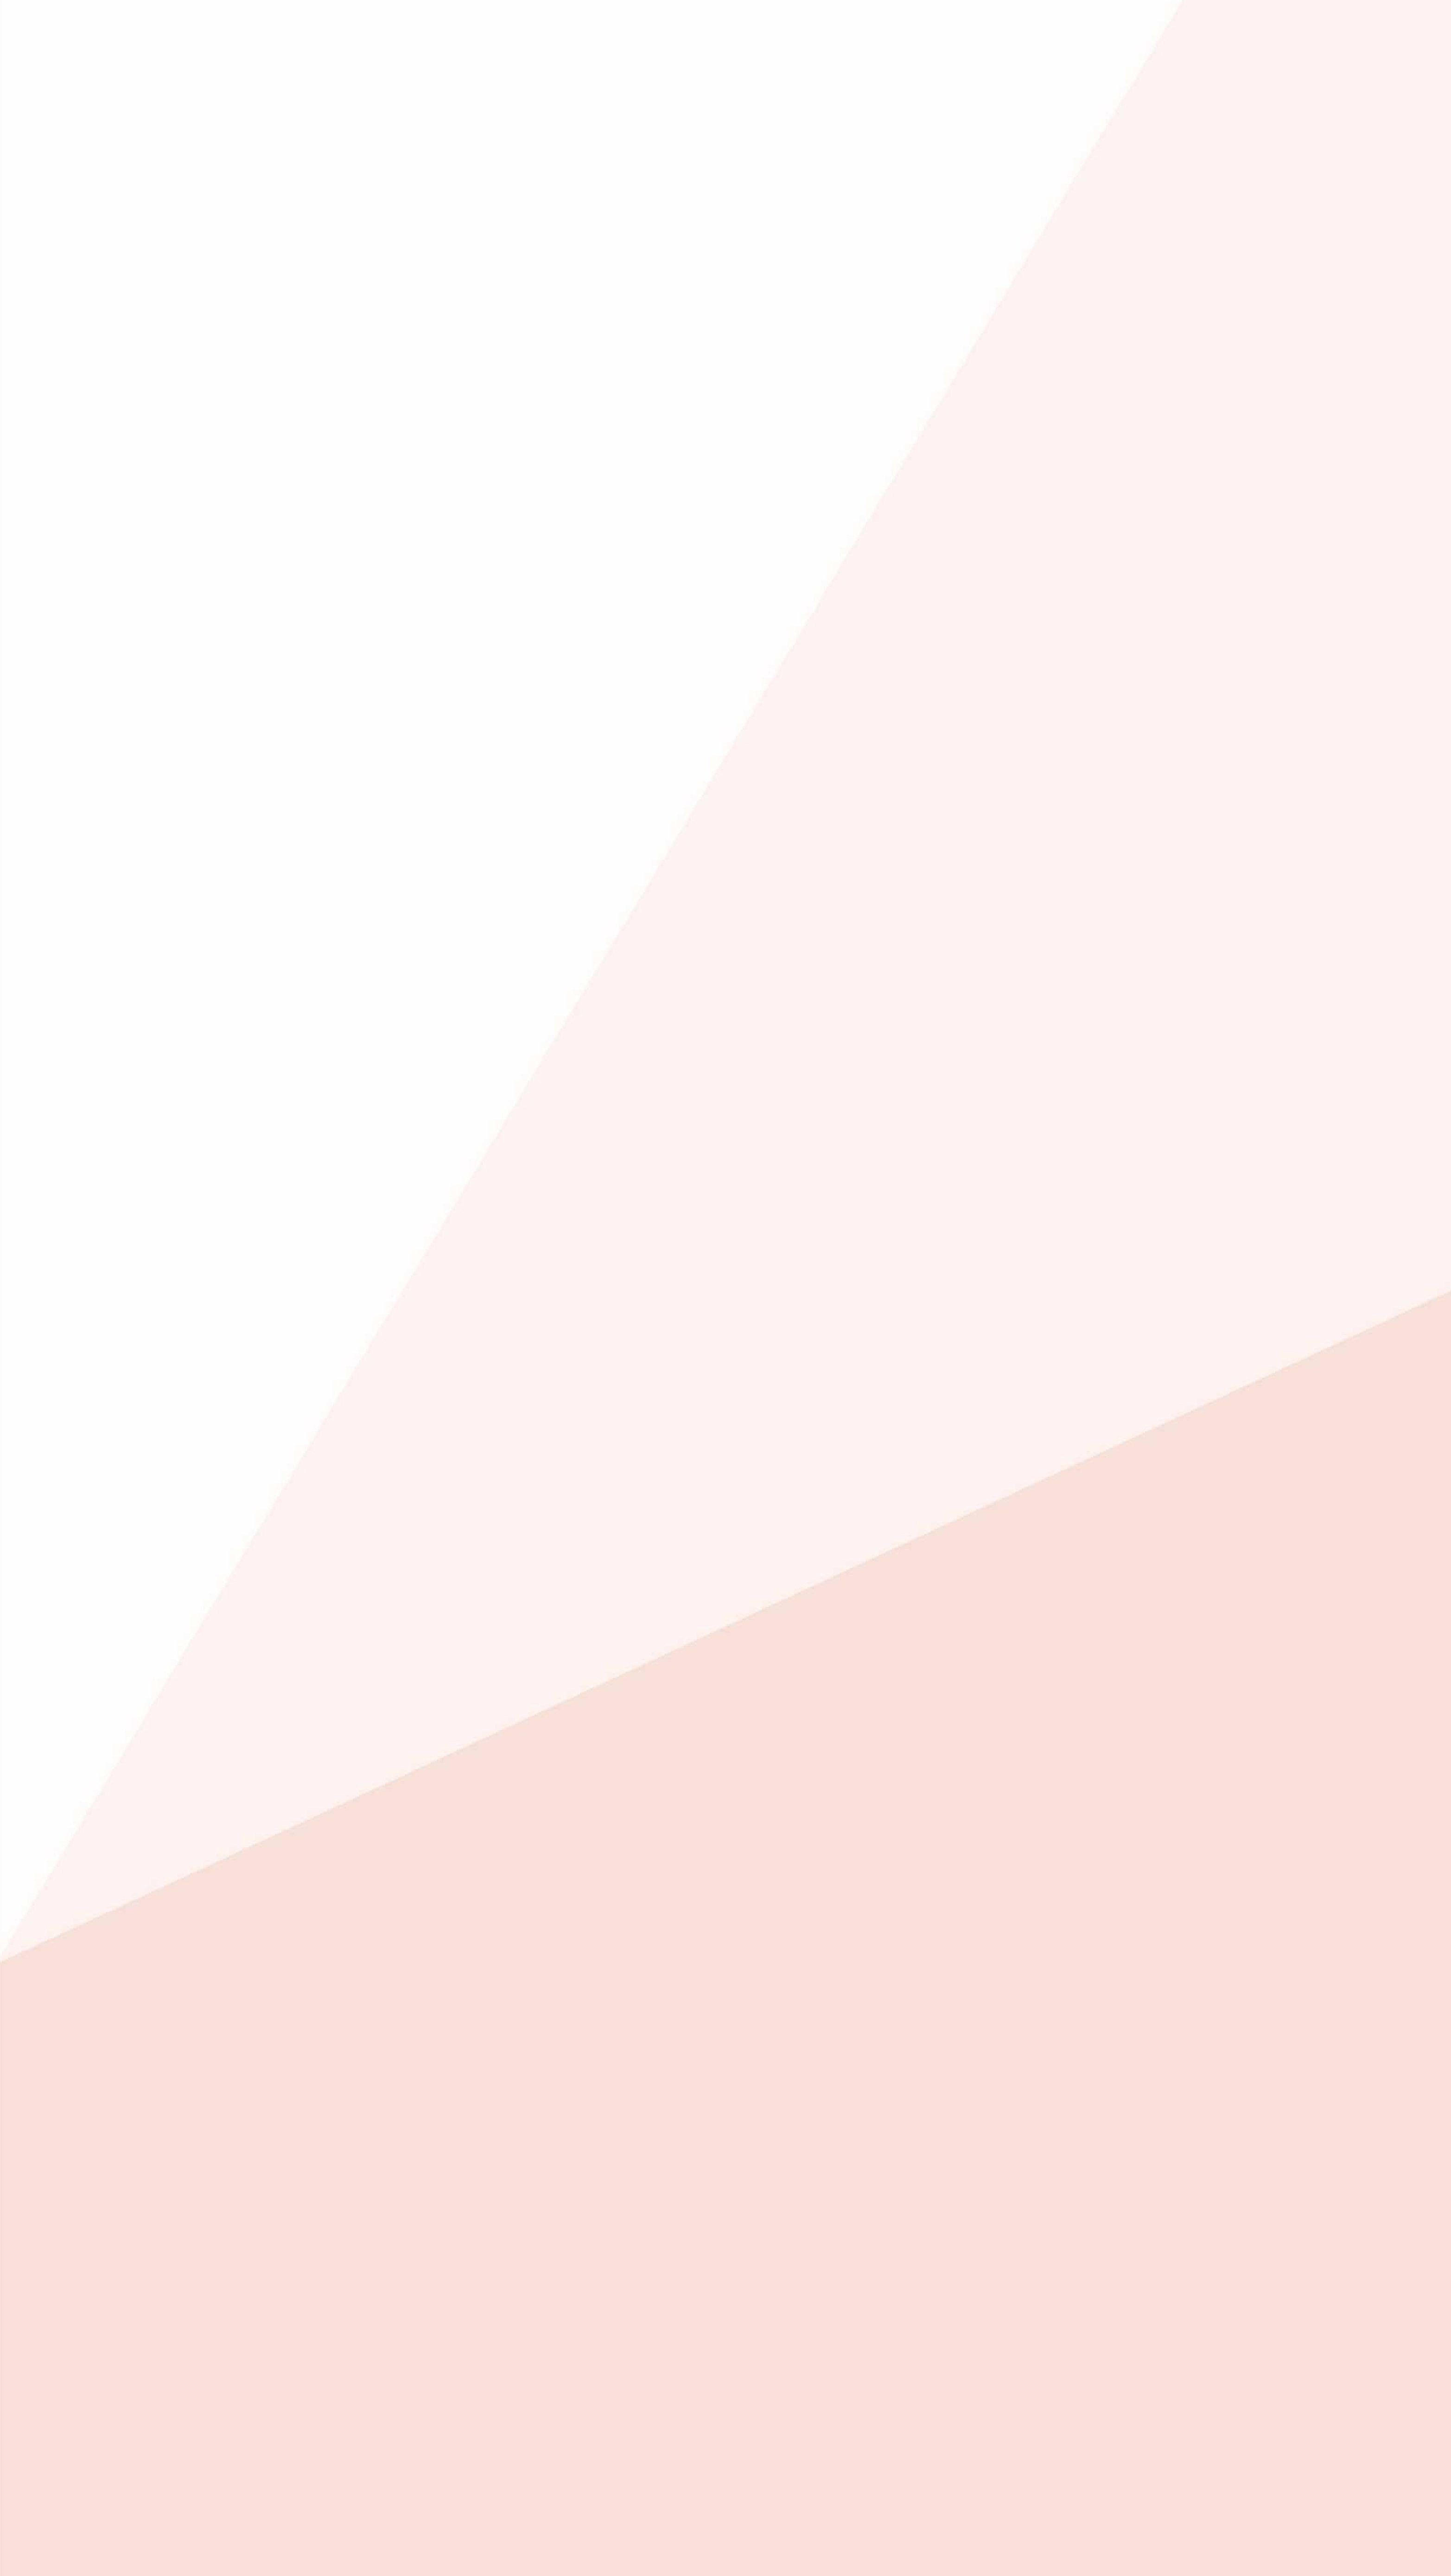 A light pink and white diagonal graphic - Blush